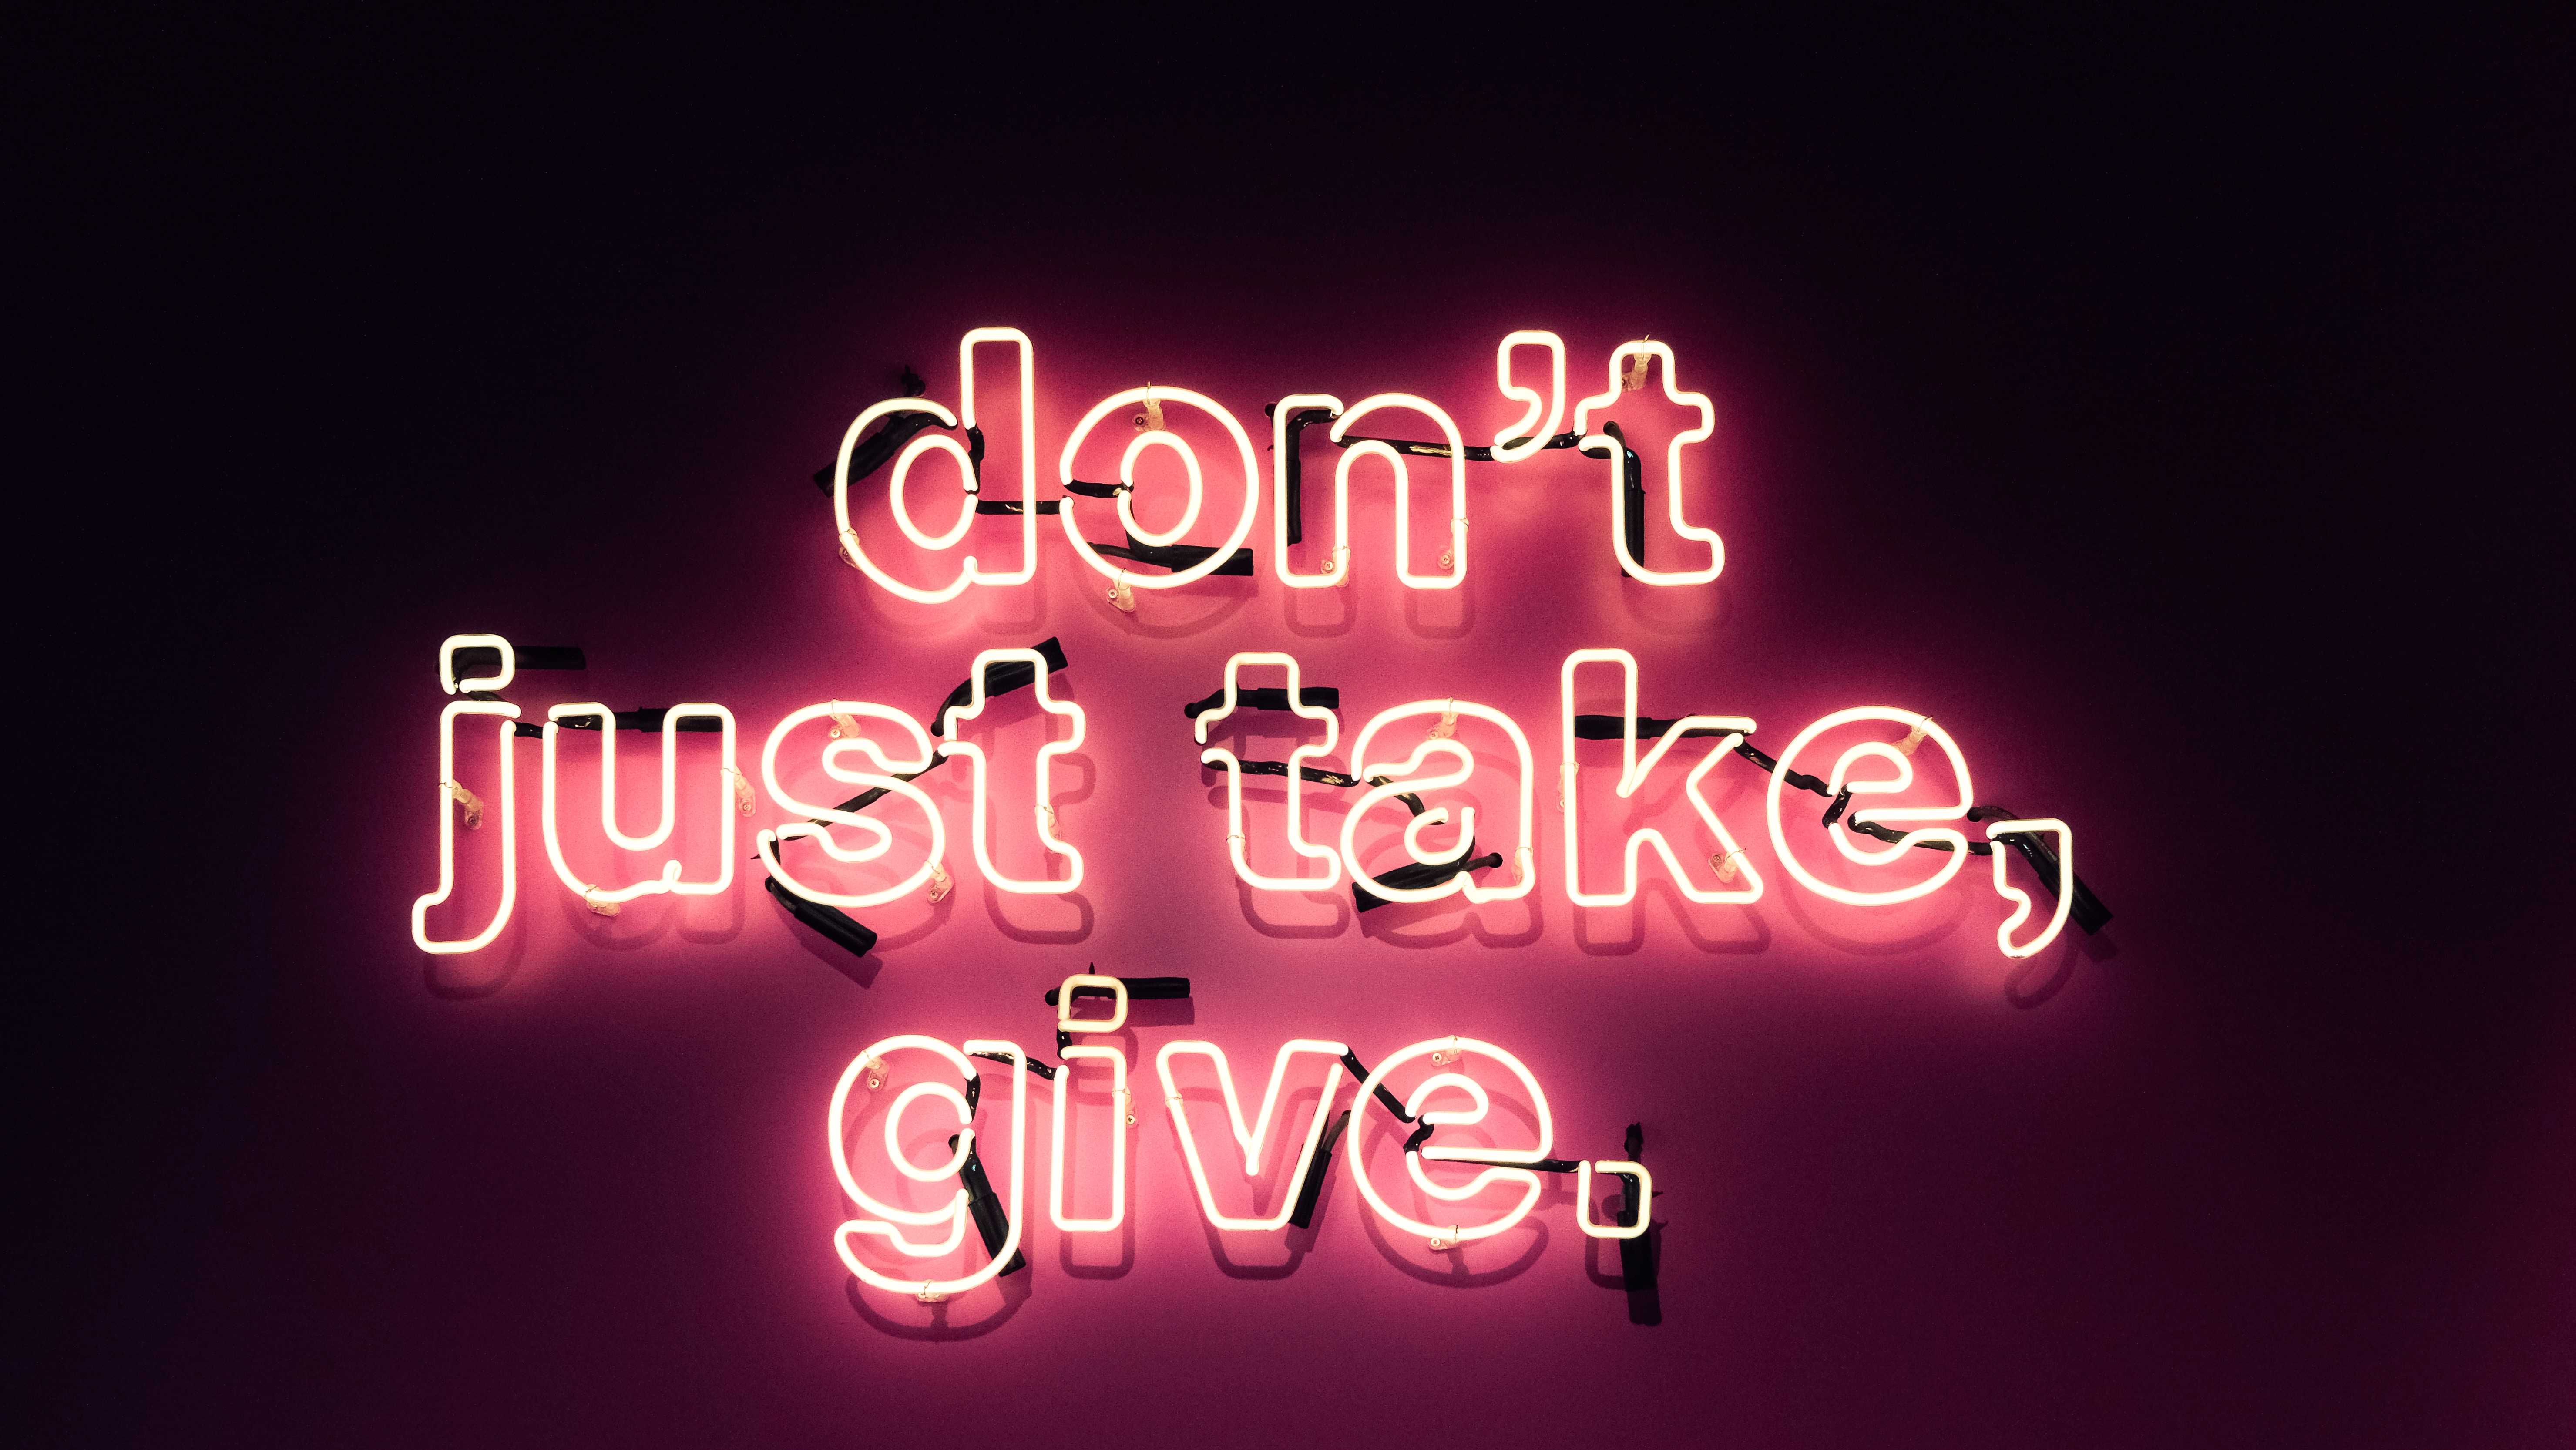 Don't just take, give ! - Crédit photo : DR.